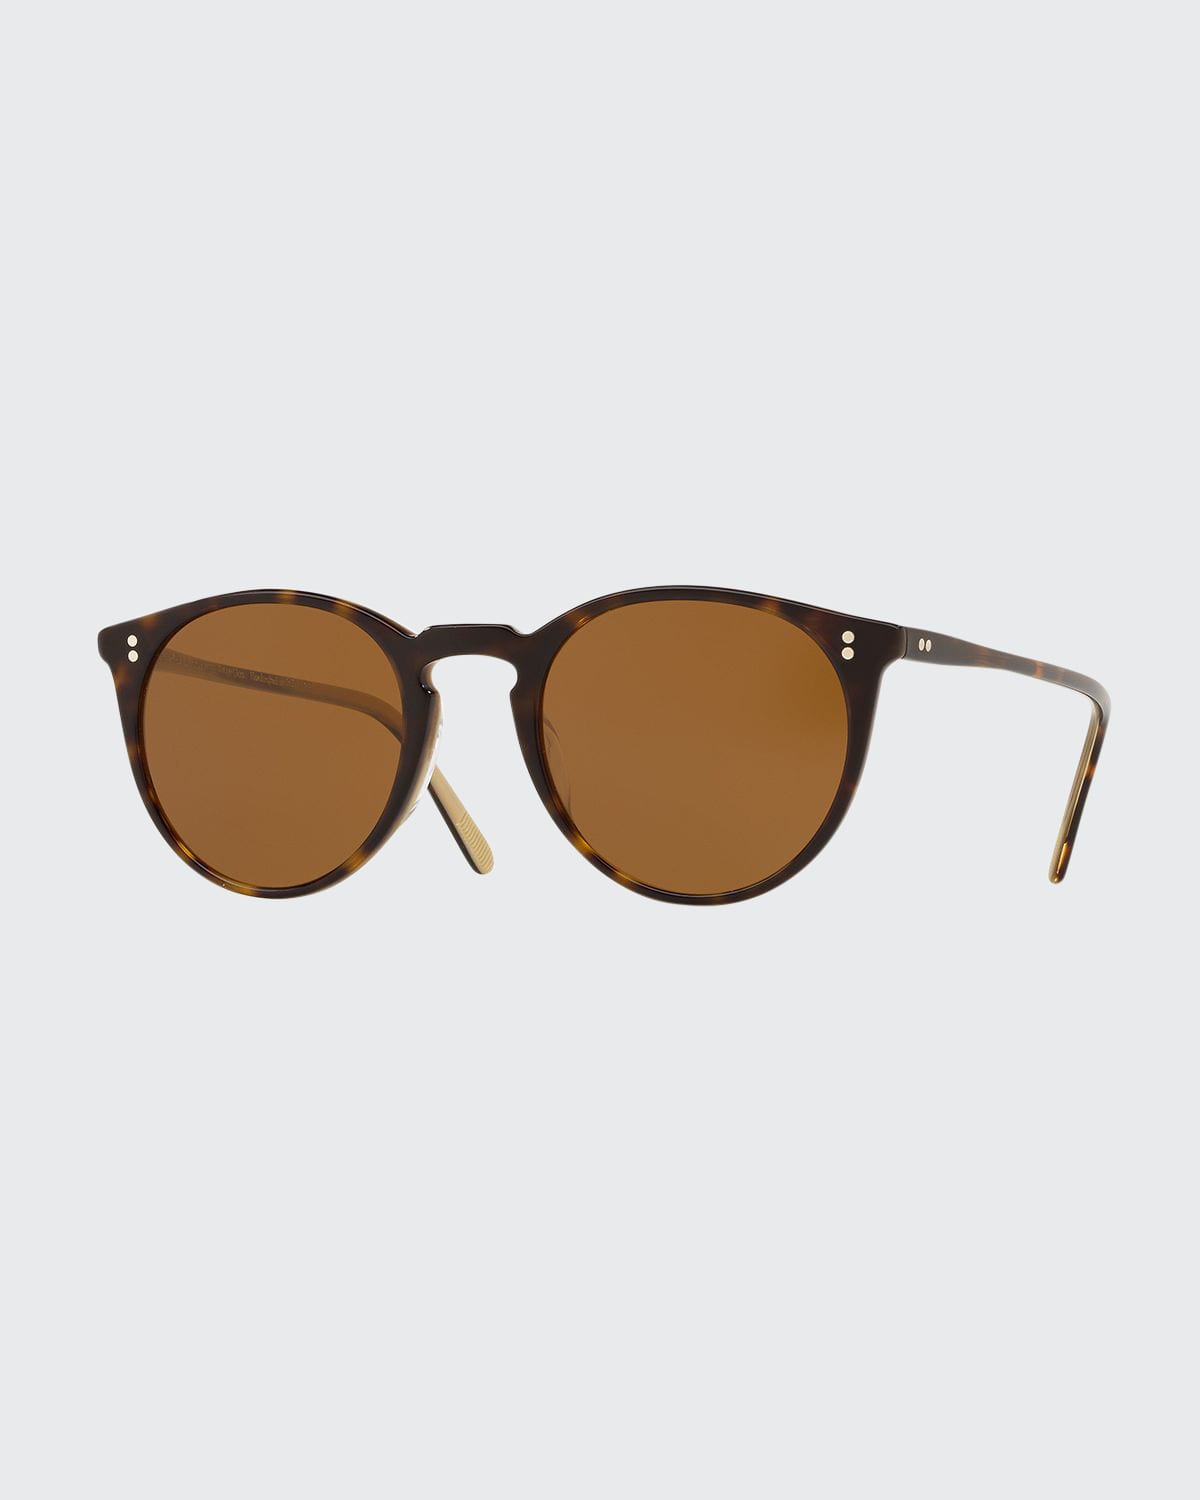 Oliver Peoples O'malley Round Acetate Sunglasses In Horn